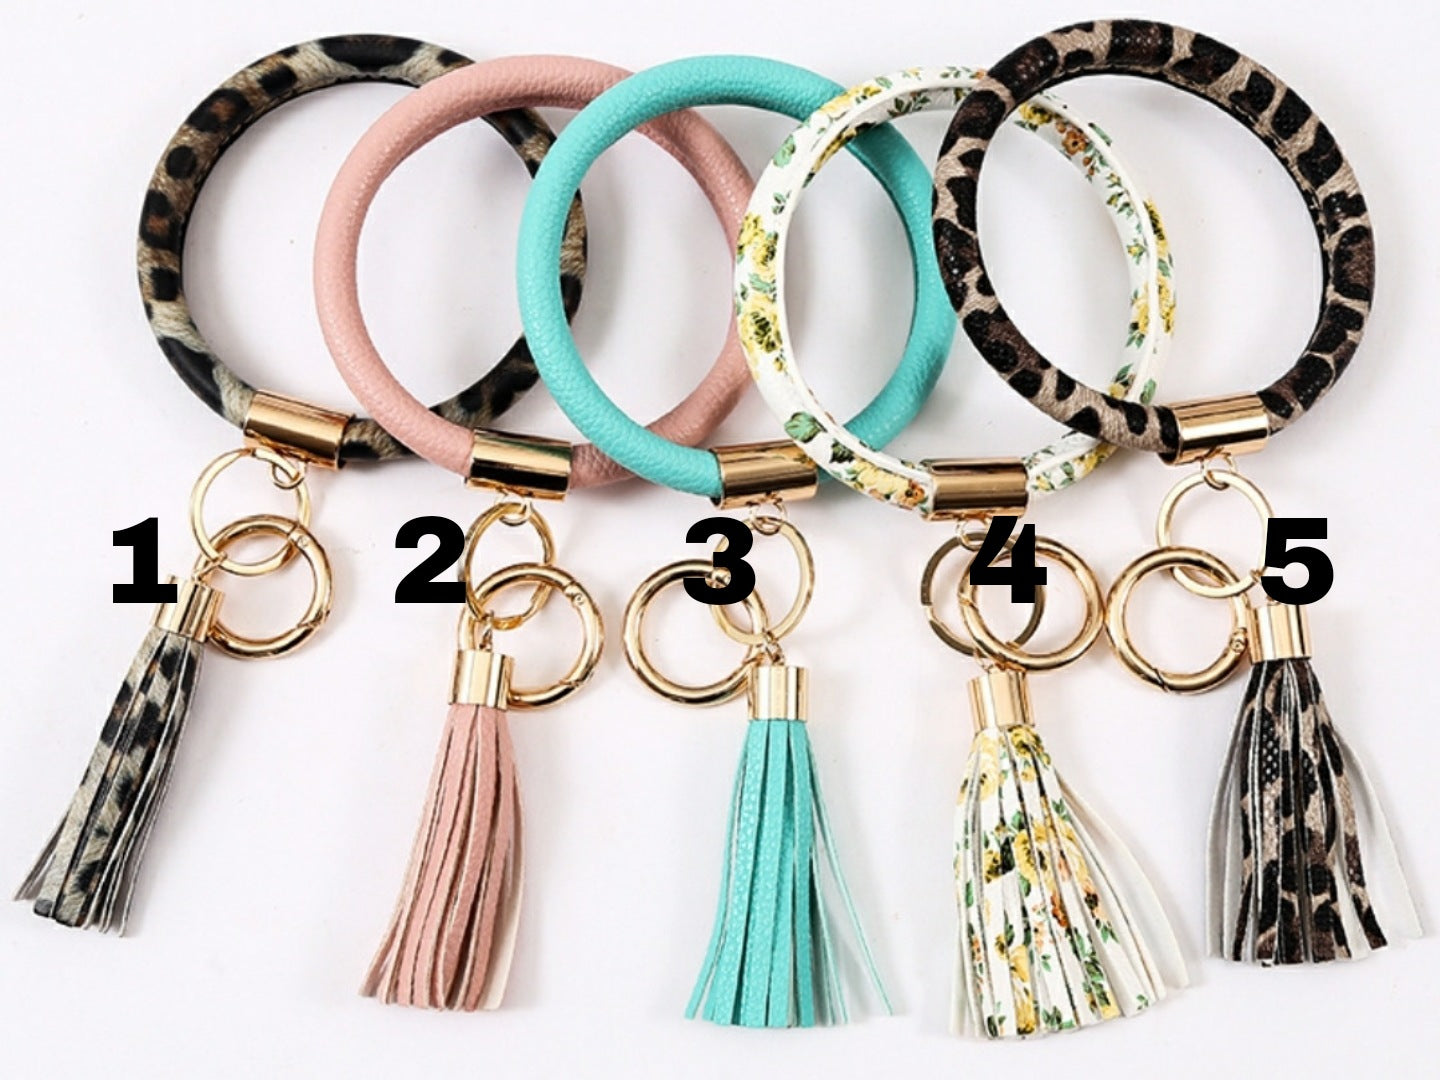 Leather wrapped keychain bracelets with leather tassel and sublimation metal disc RTS